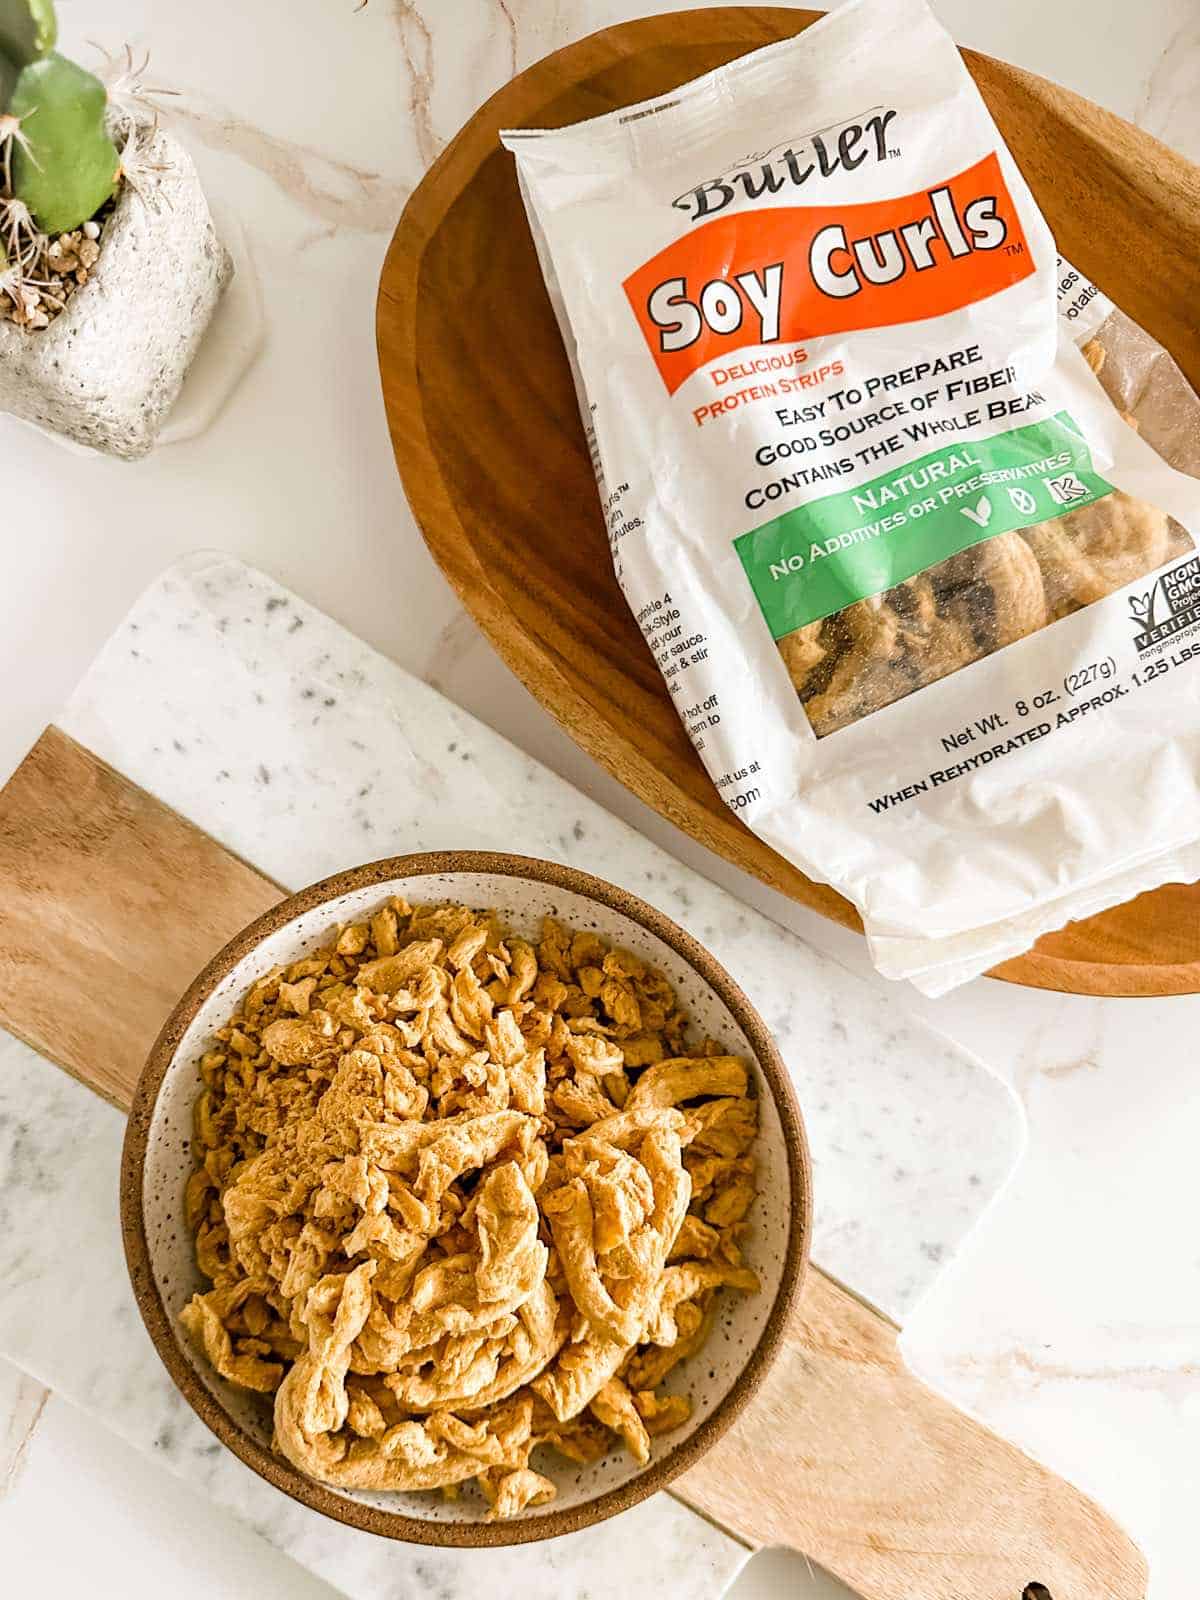 A package of Butler Soy Curls with a bowl of the soy curls next to it.